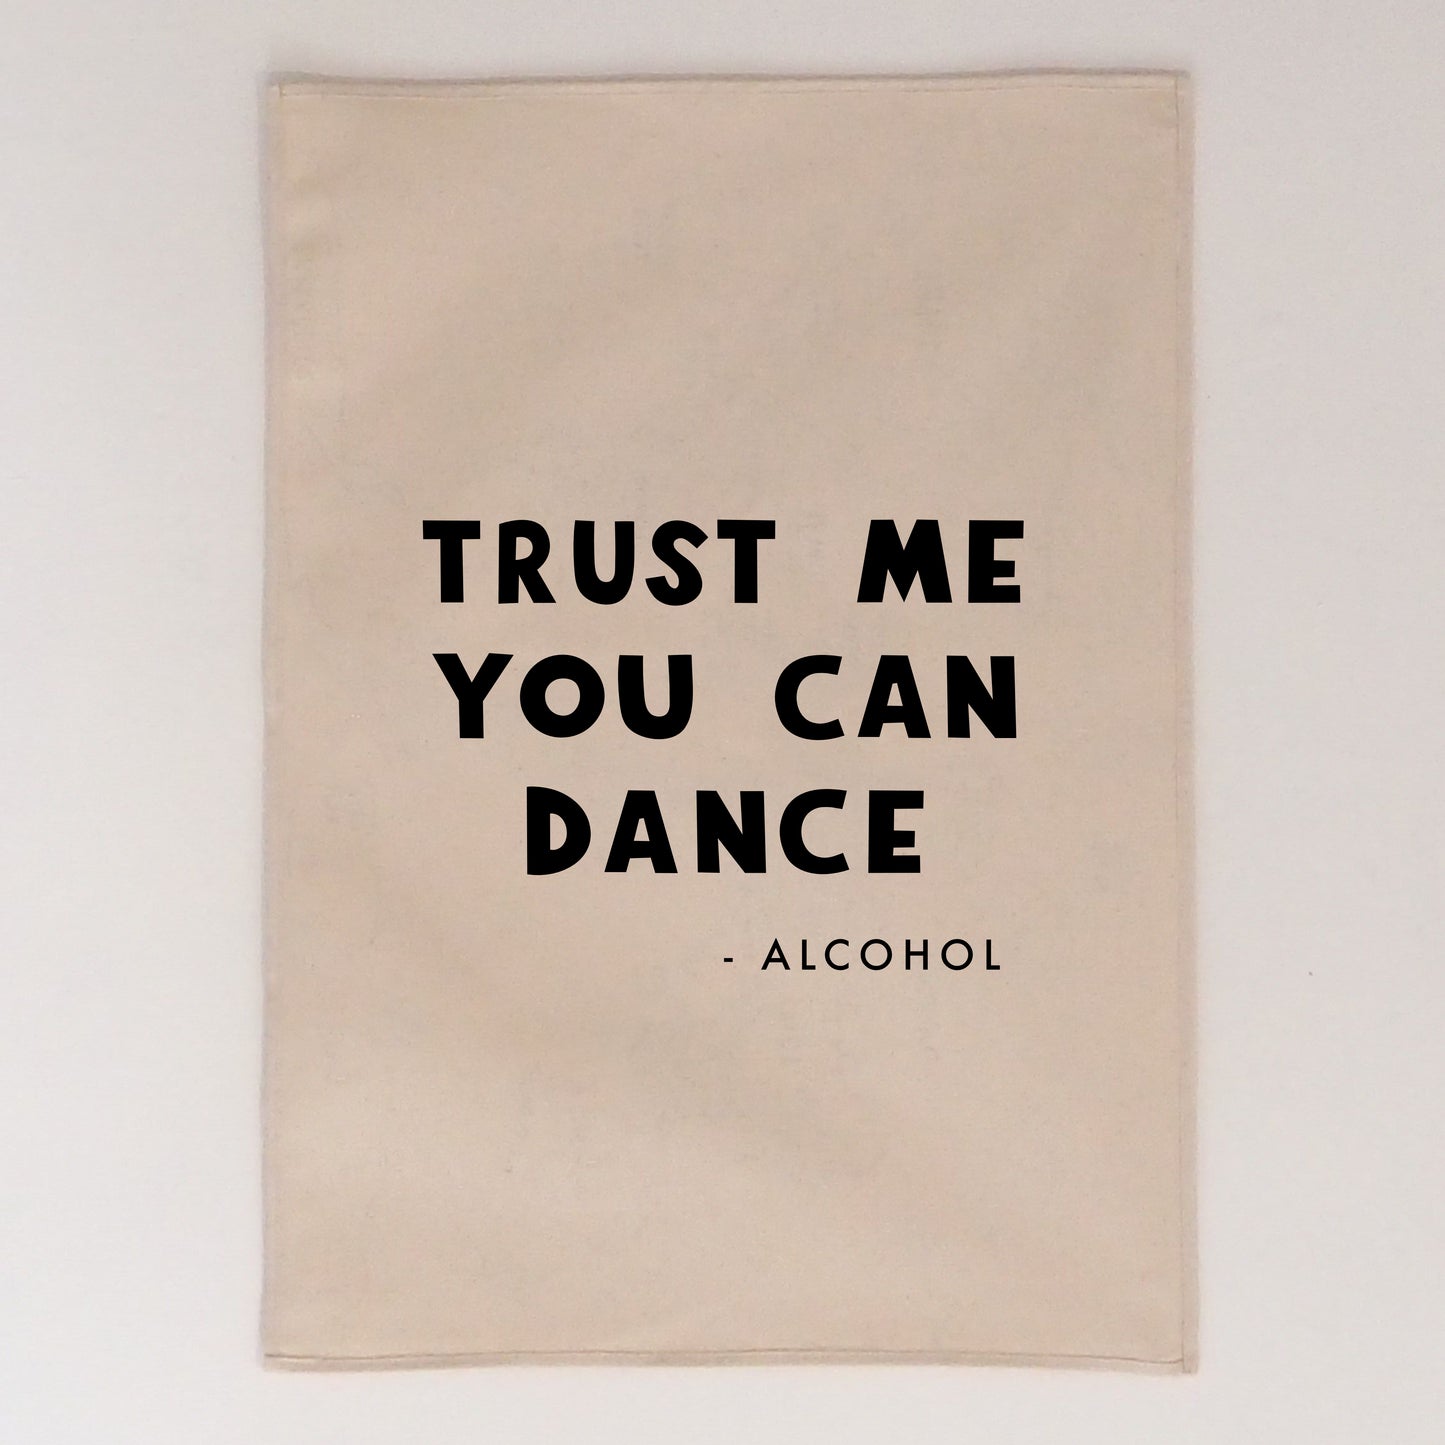 Trust Me You Can Dance Wall Hanging 50x70cm - more colours available.